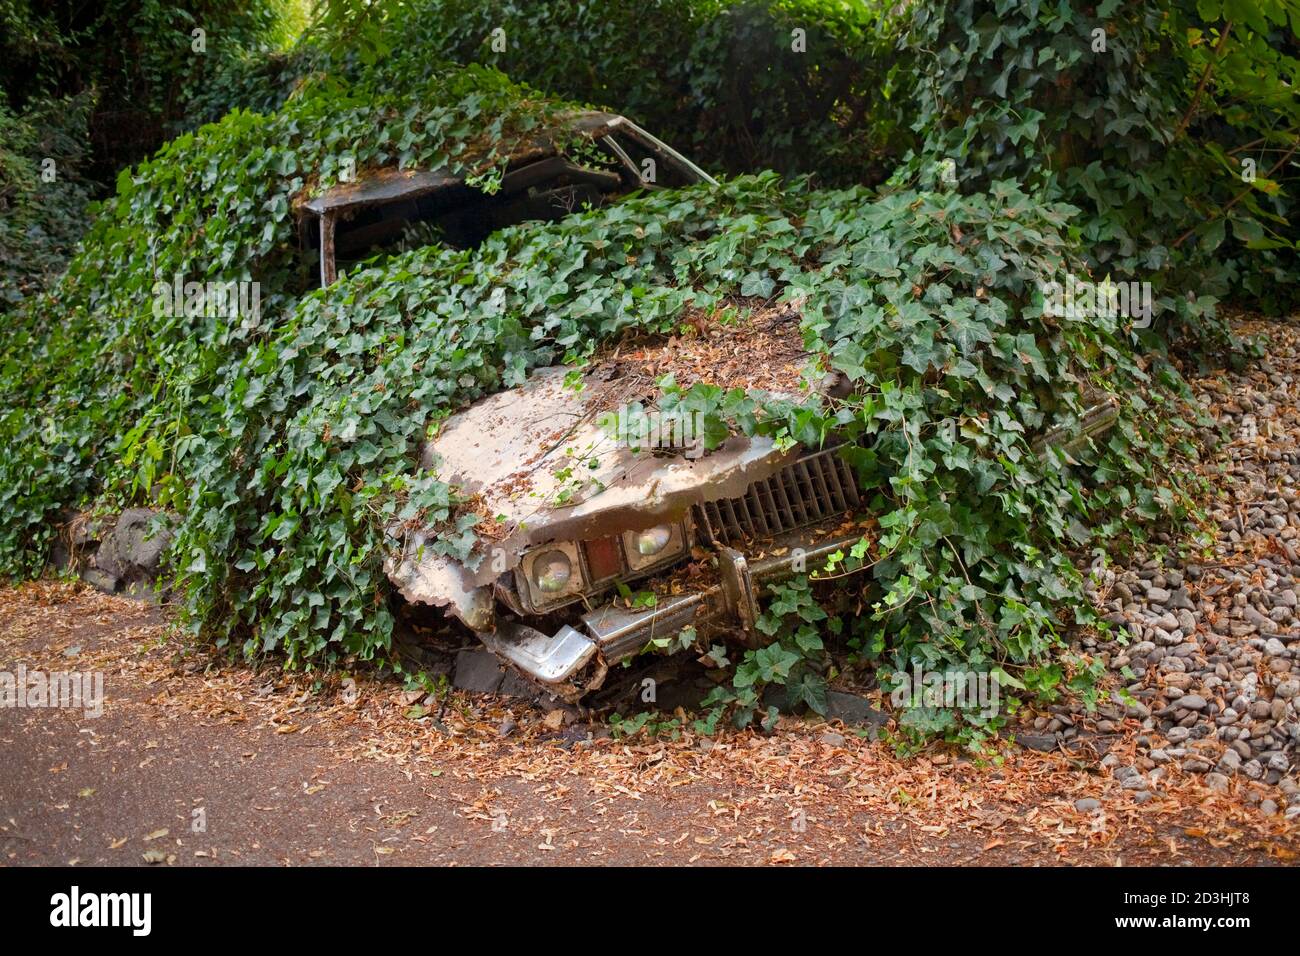 overgrown car, large old limousine, good symbol for rising electric vehicle popularity and environment protection Stock Photo